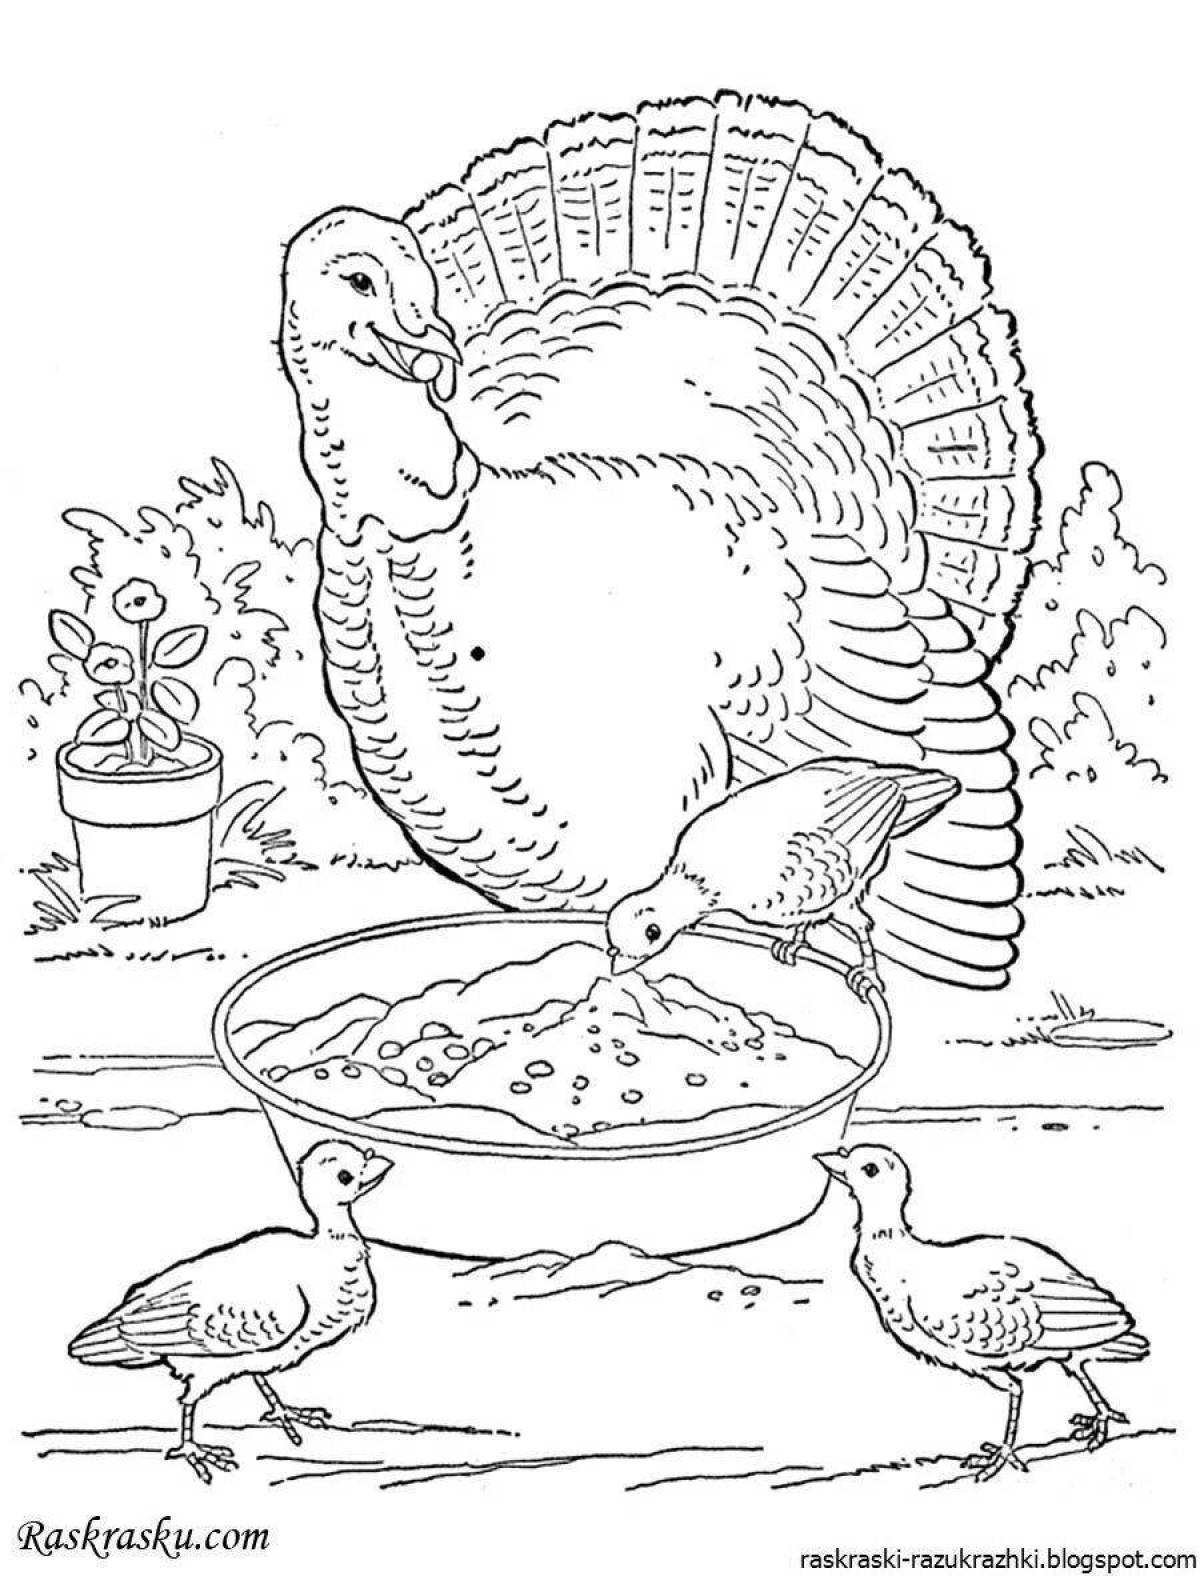 Adorable poultry coloring page for 5-7 year olds